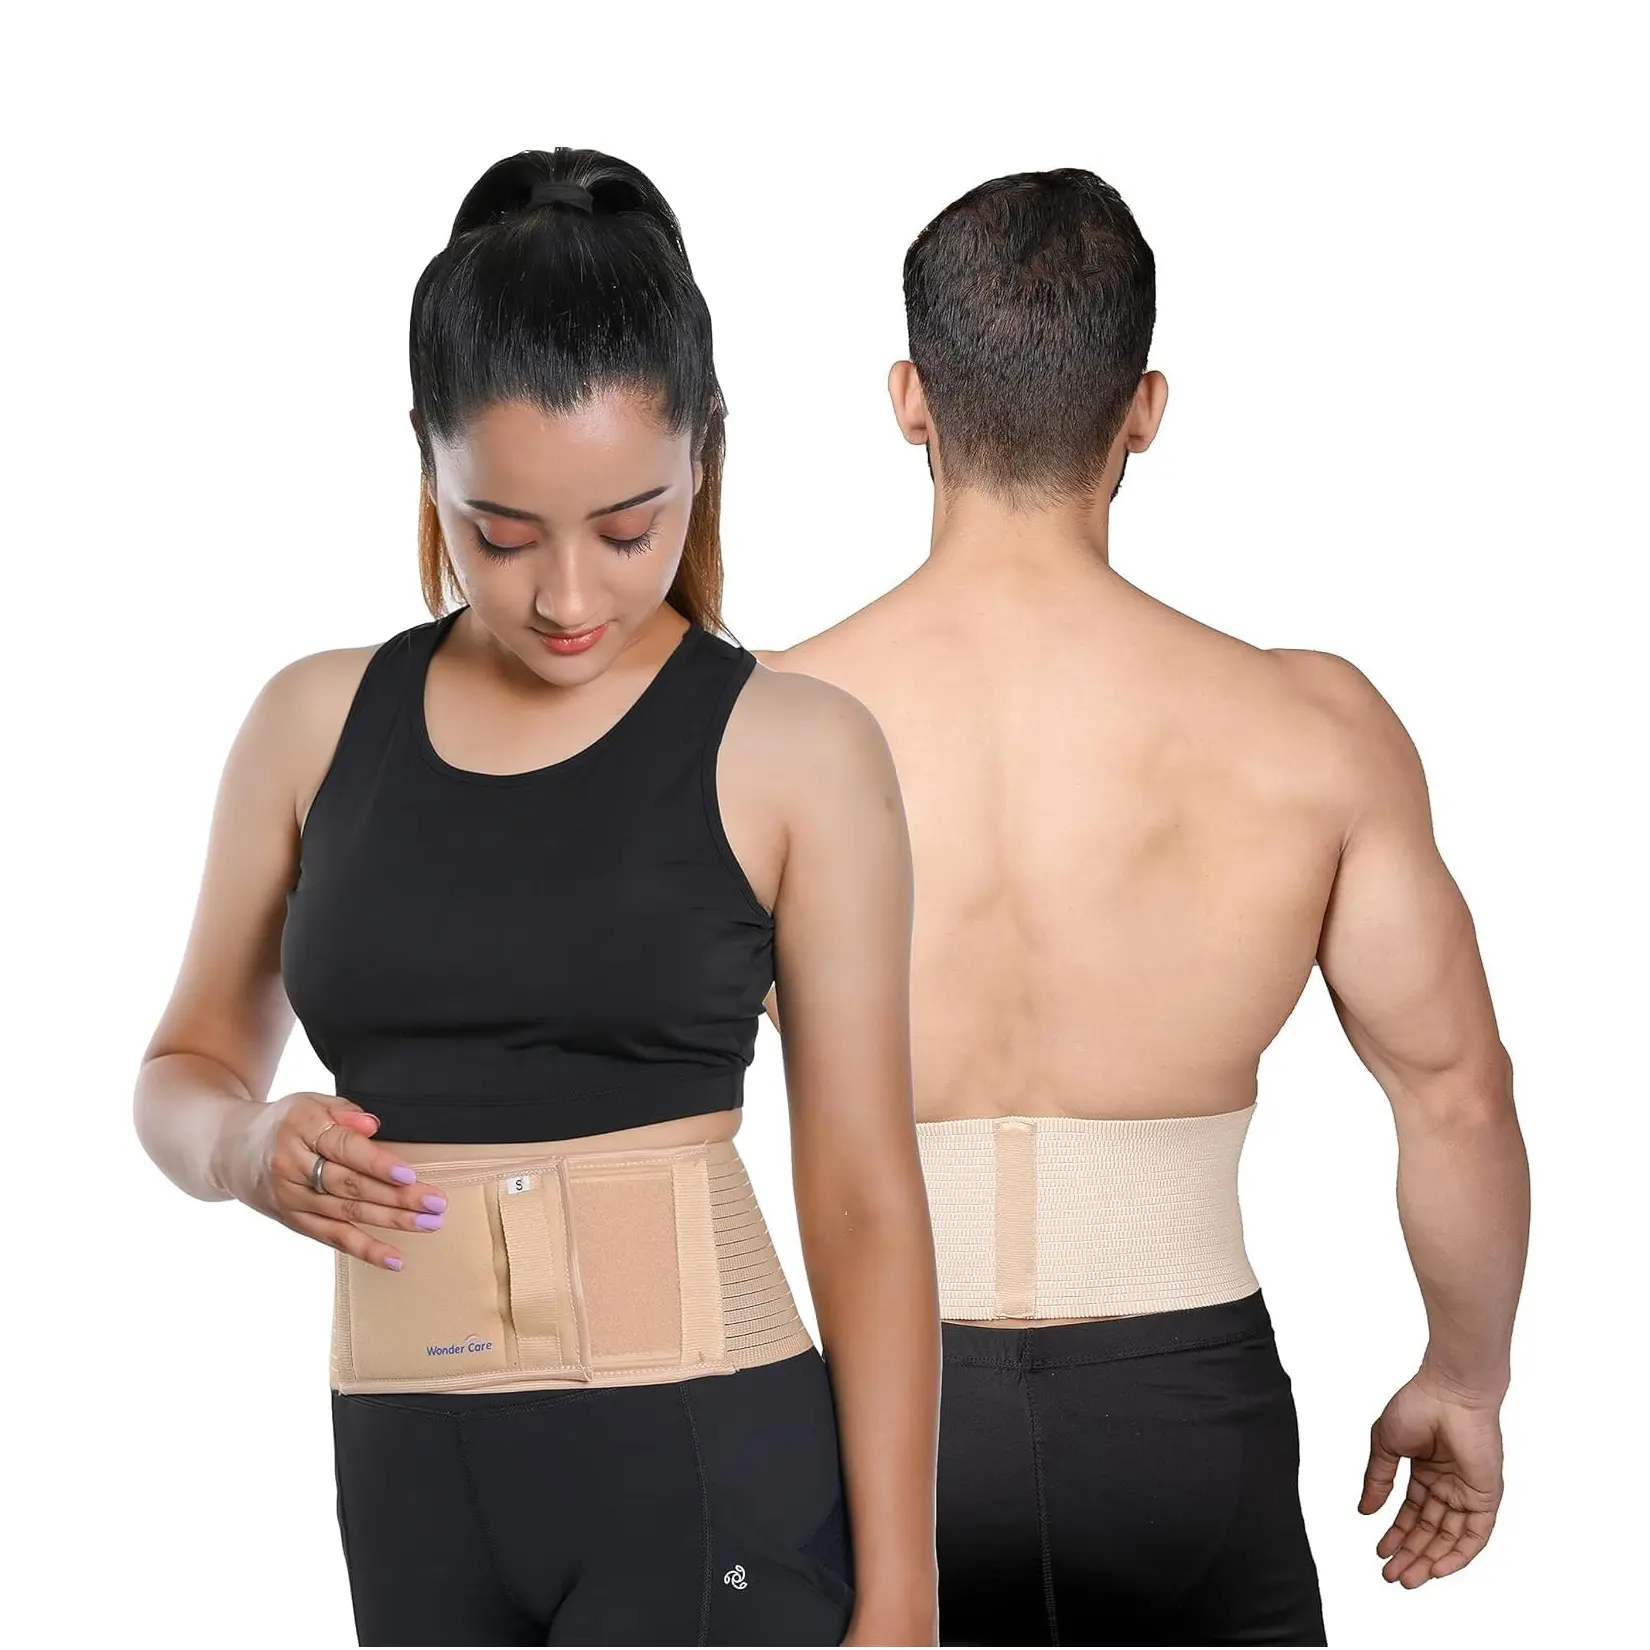 Umbilical Hernia Support Belt Abdominal Binder for Belly Button Hernias or Navel Hernias Pain Relief Belt